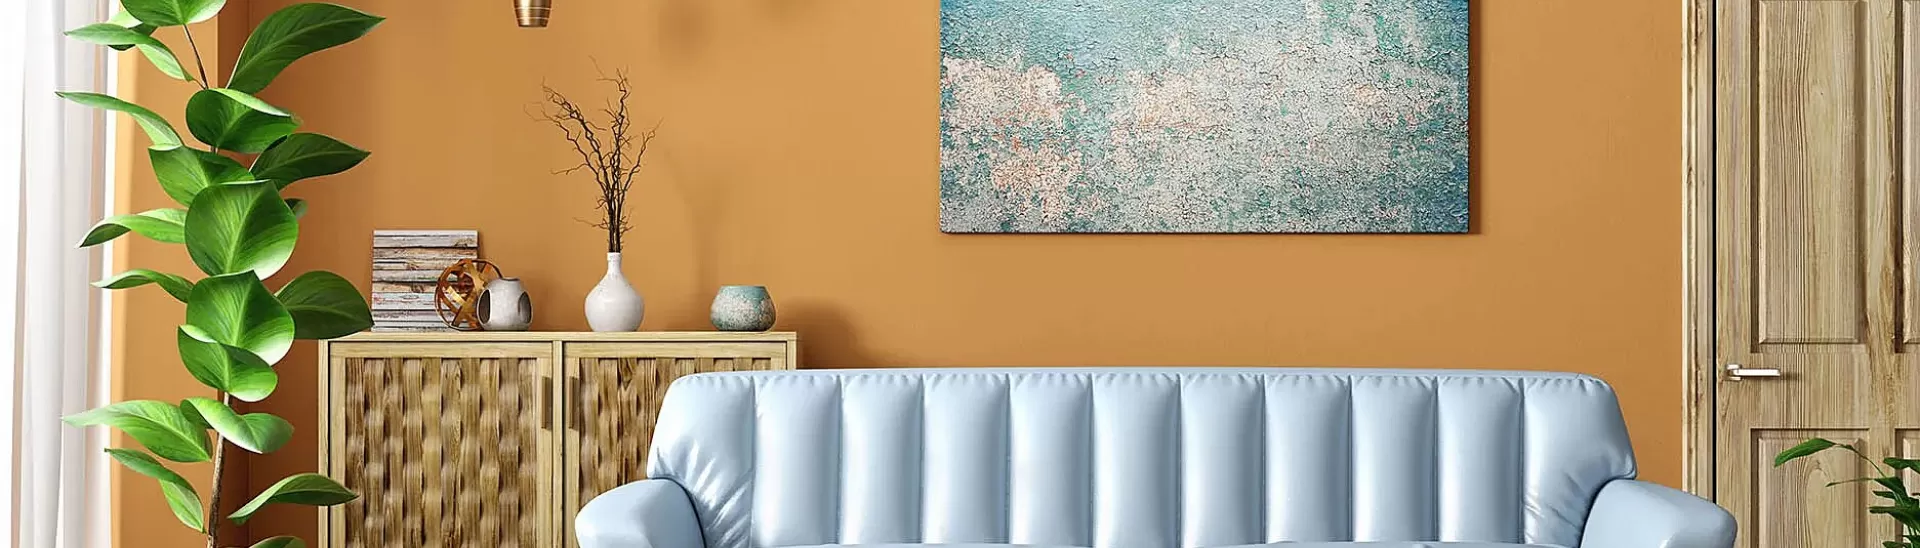 9 ways to make a small space feel bigger with wall art